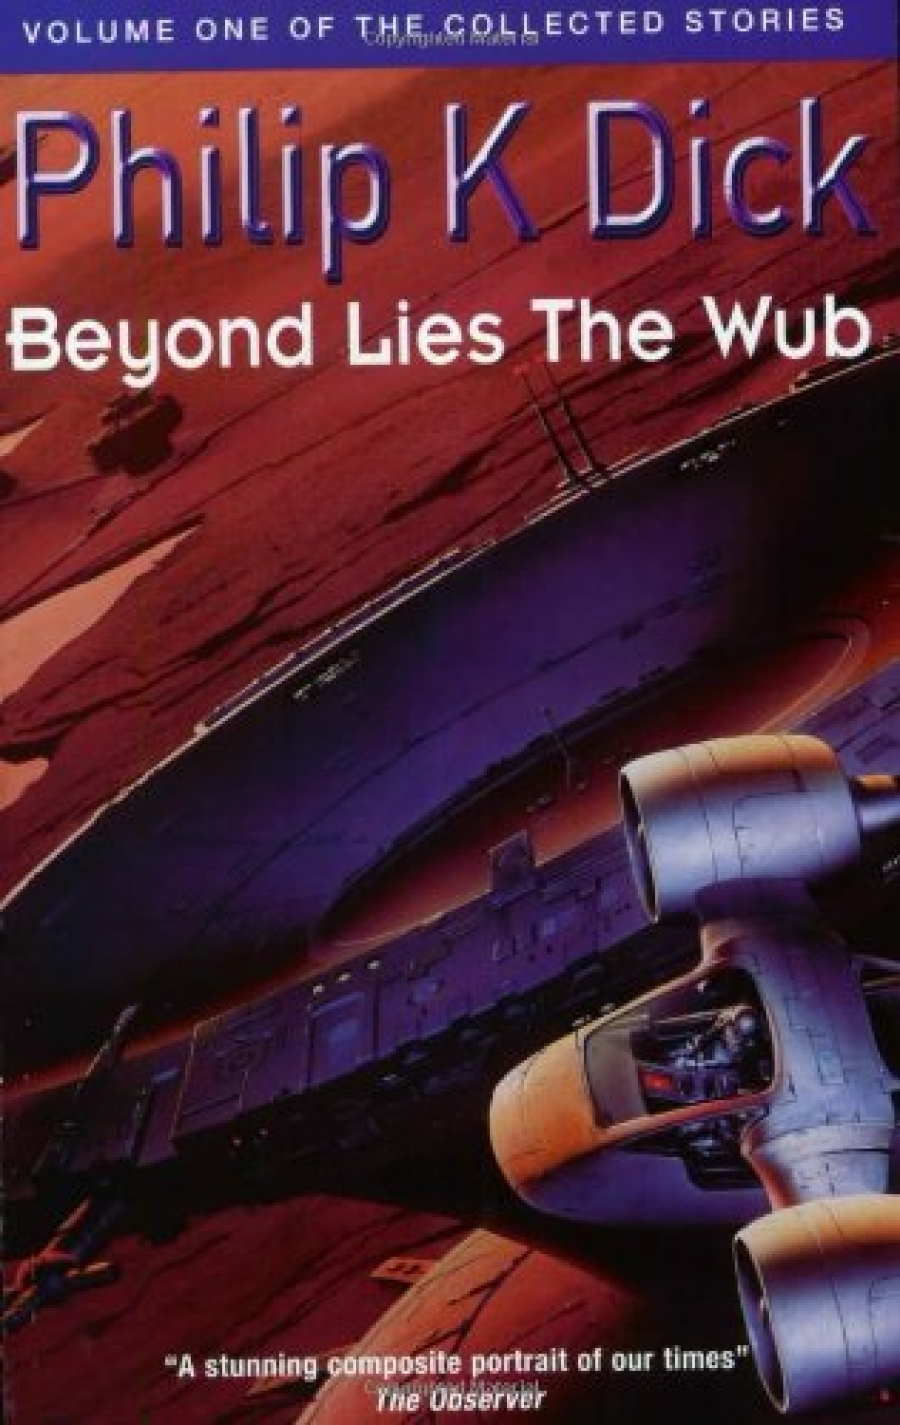 Dick, Philip K. Beyond Lies the Wub (Collected Stories vol.1) 